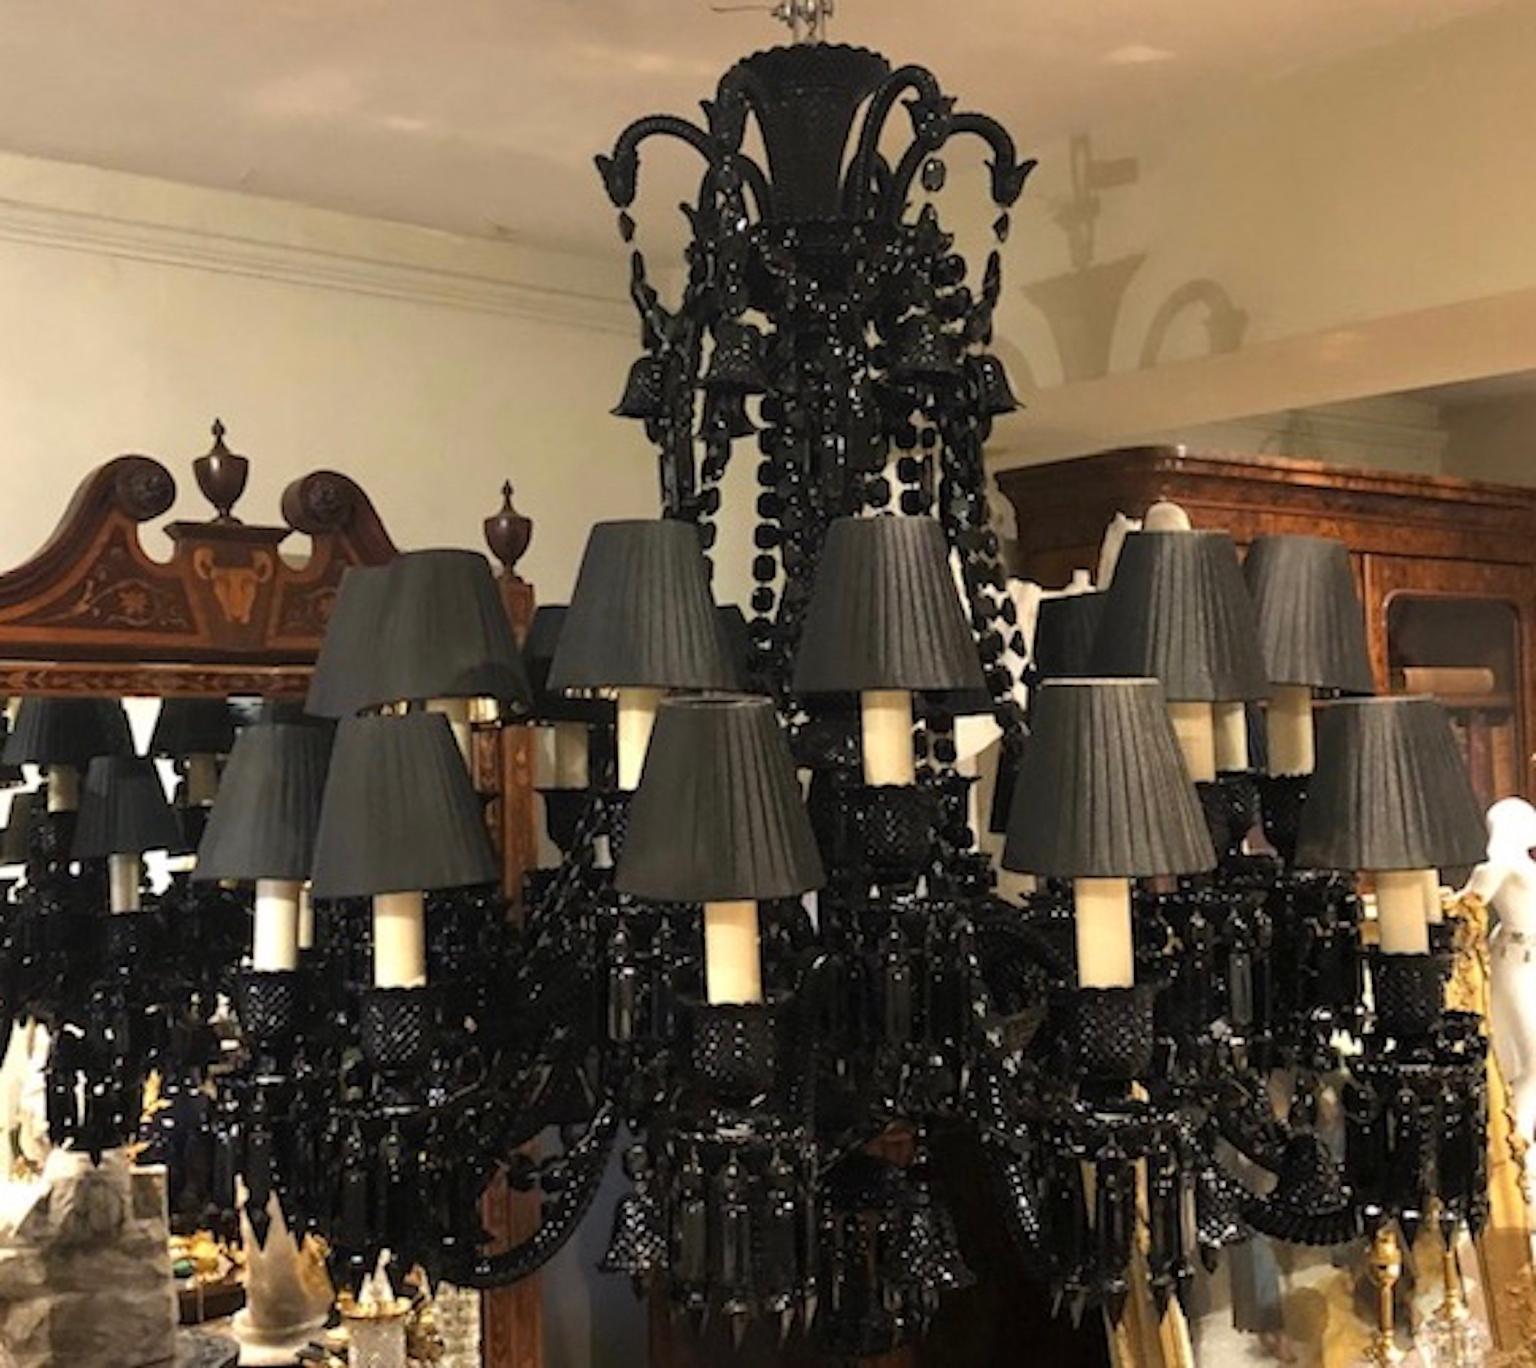 Baccarat Zenith crystal noir chandelier by Philippe Starck 24 light
A superb and stunning example of the Zenith Noir Baccarat 24 light chandelier in black crystal.

Designed by Philippe Starck, who managed to maintain the chandeliers original